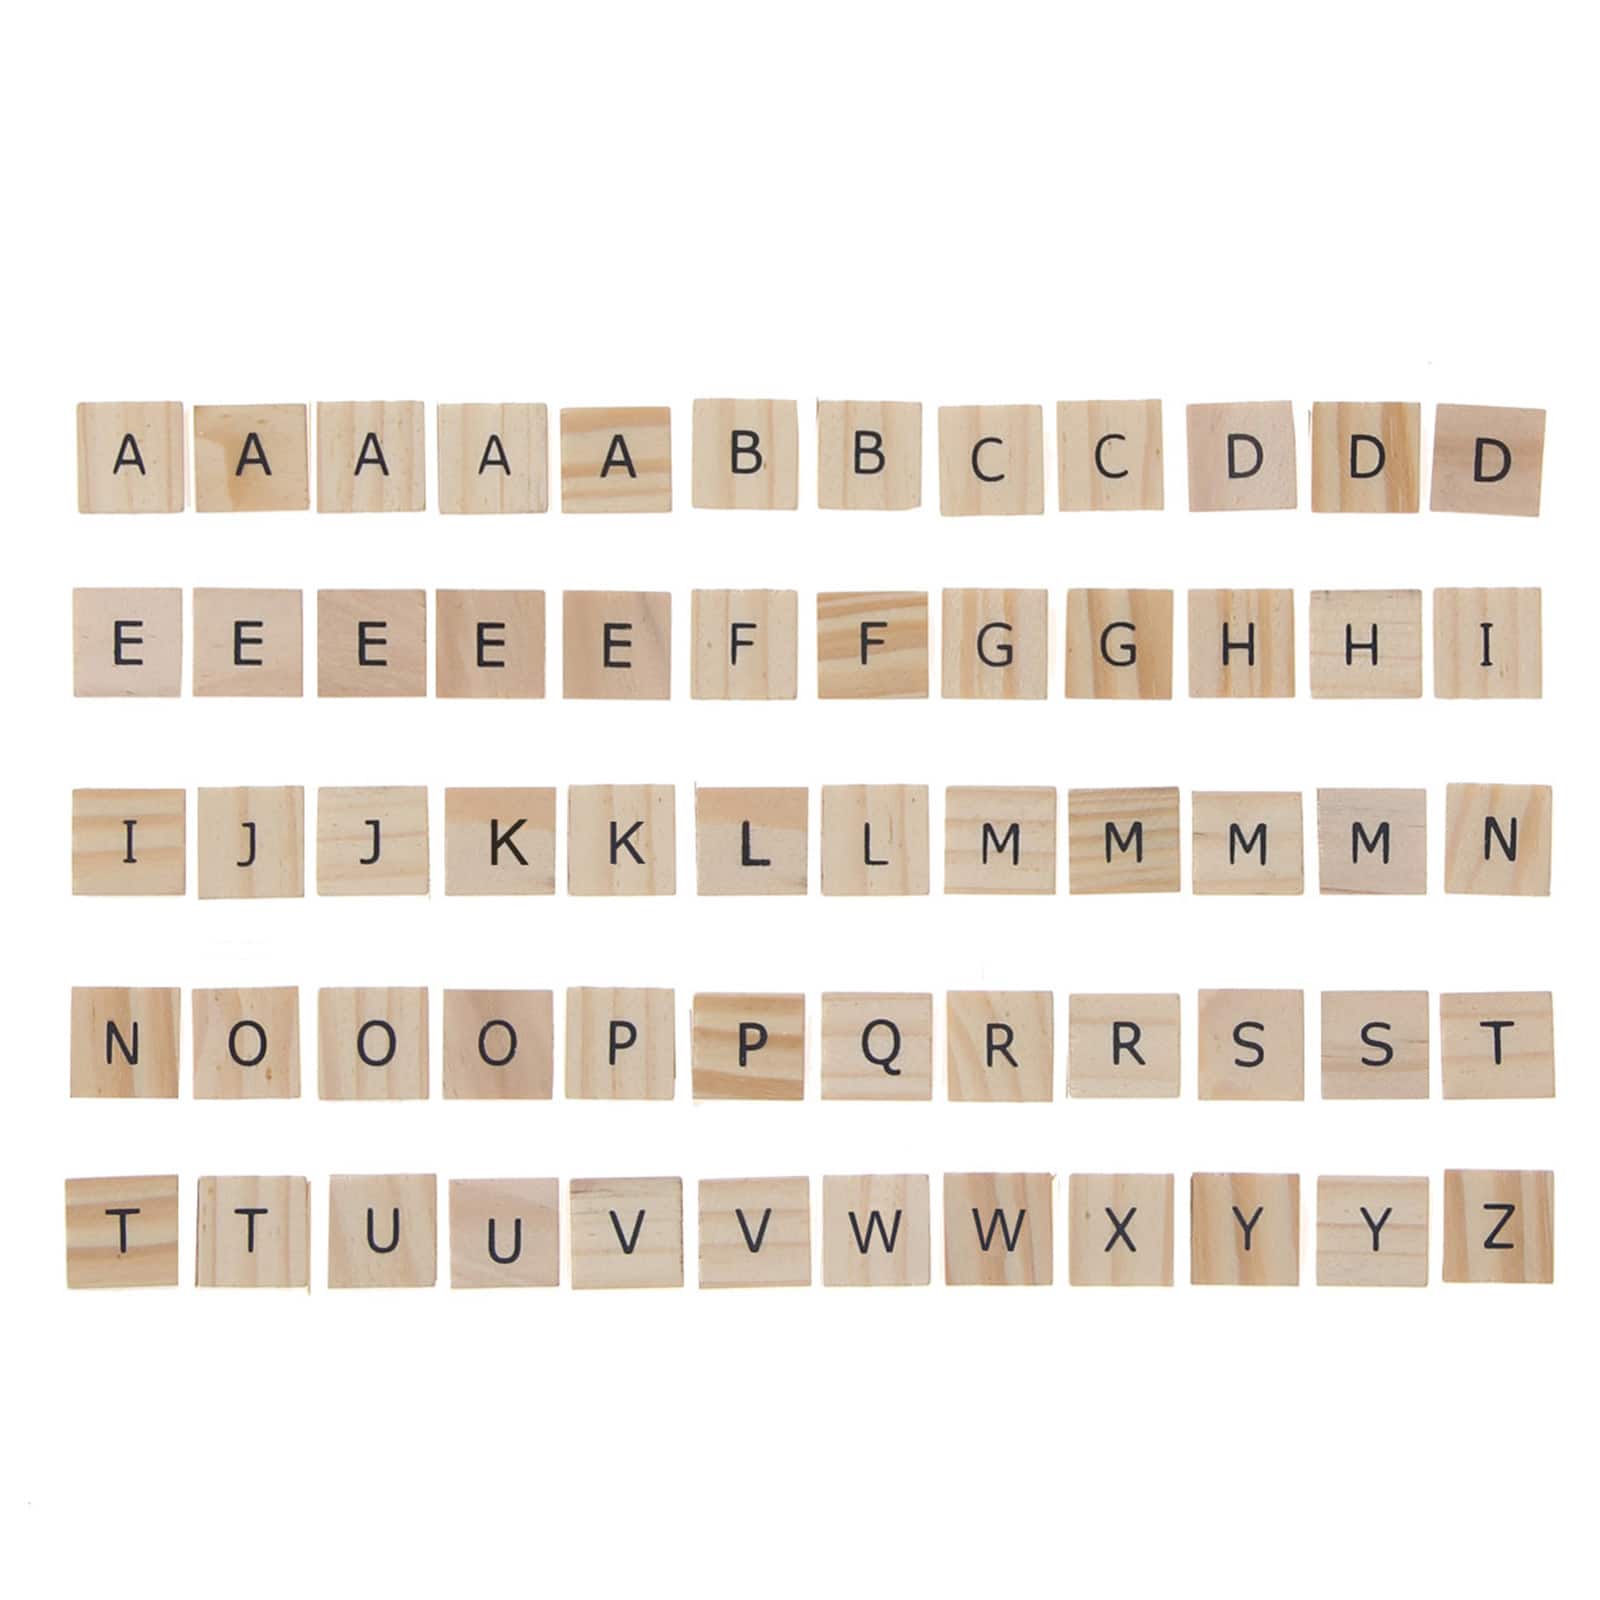 GAME PIECES PACKS OF 5,10,20,50 WHITE QUALITY SCRABBLE TILE LETTERS 